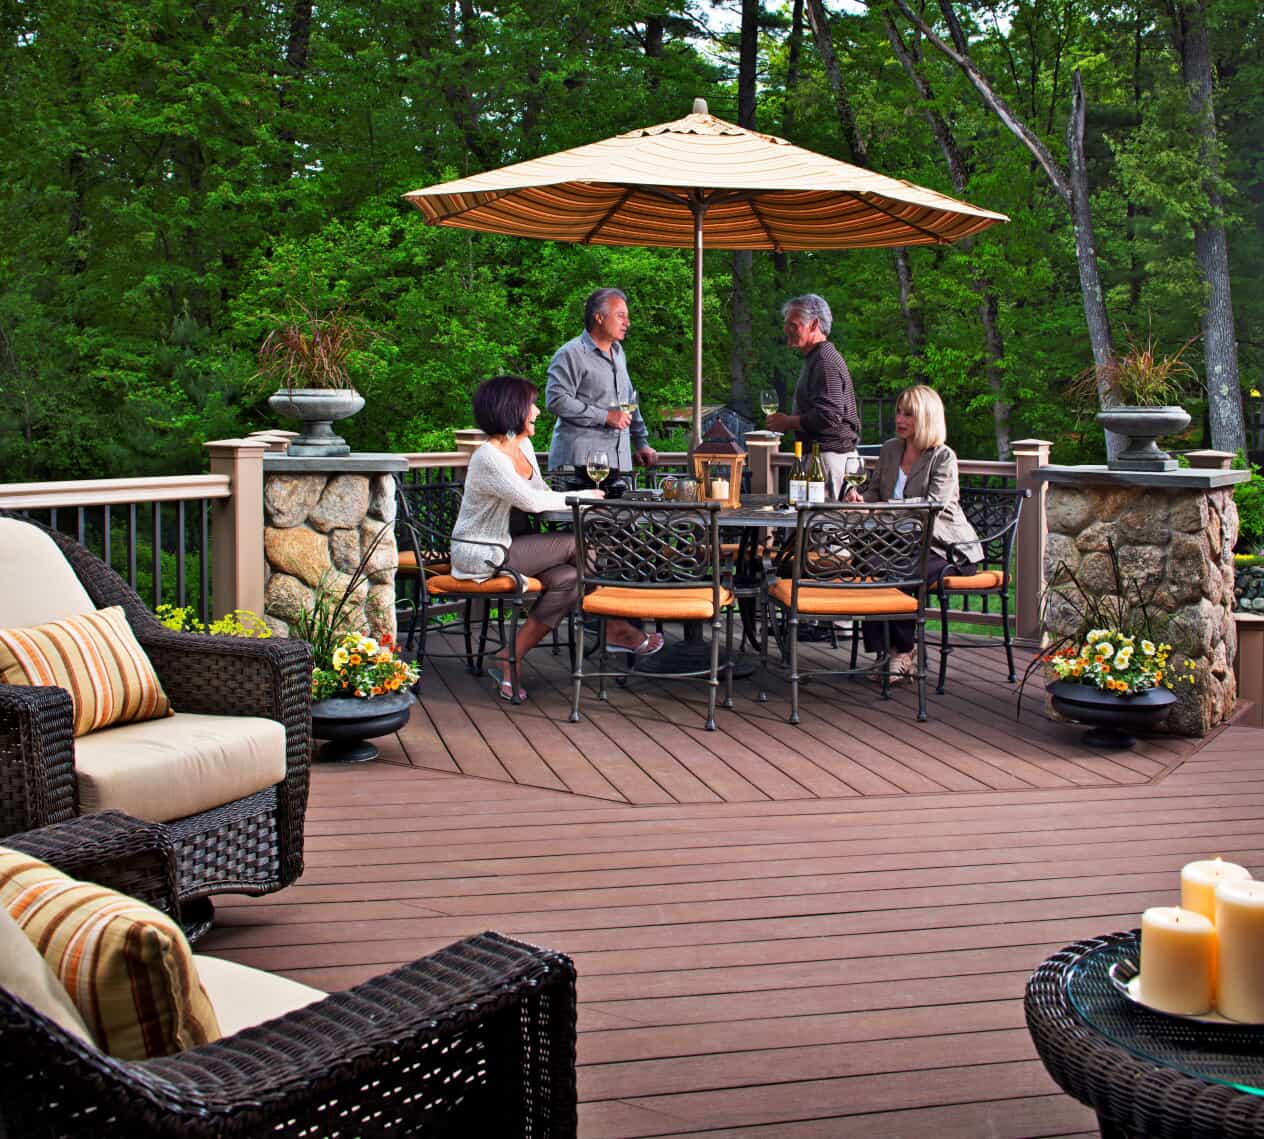 4 individuals around a patio set on a deck.